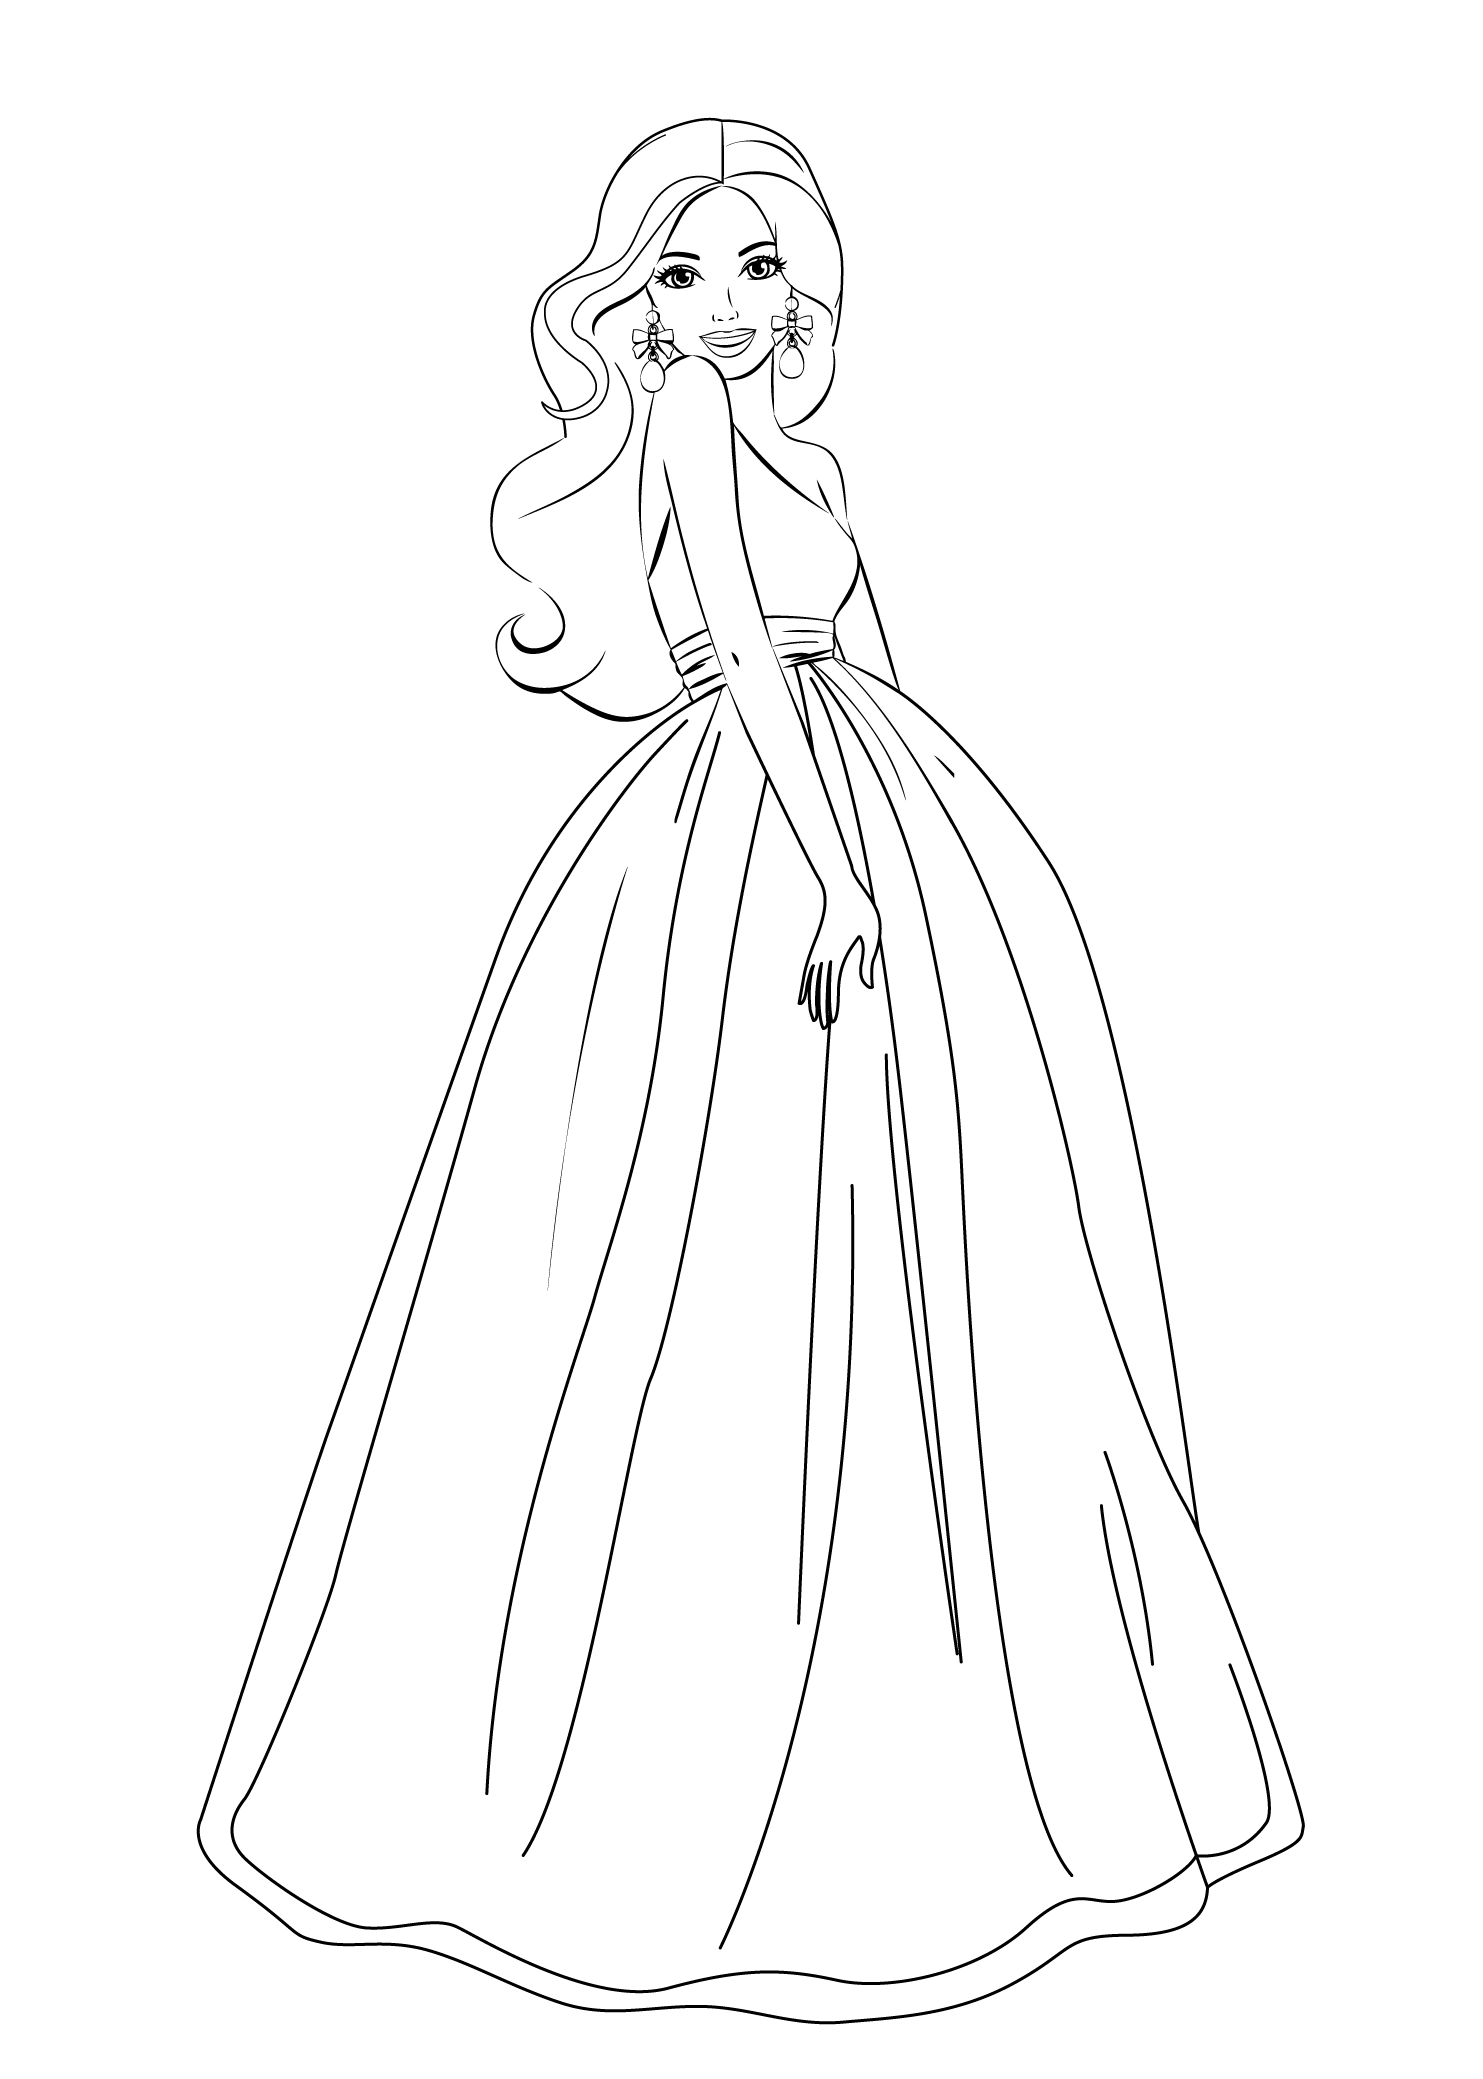 Barbie Printable Coloring Pages